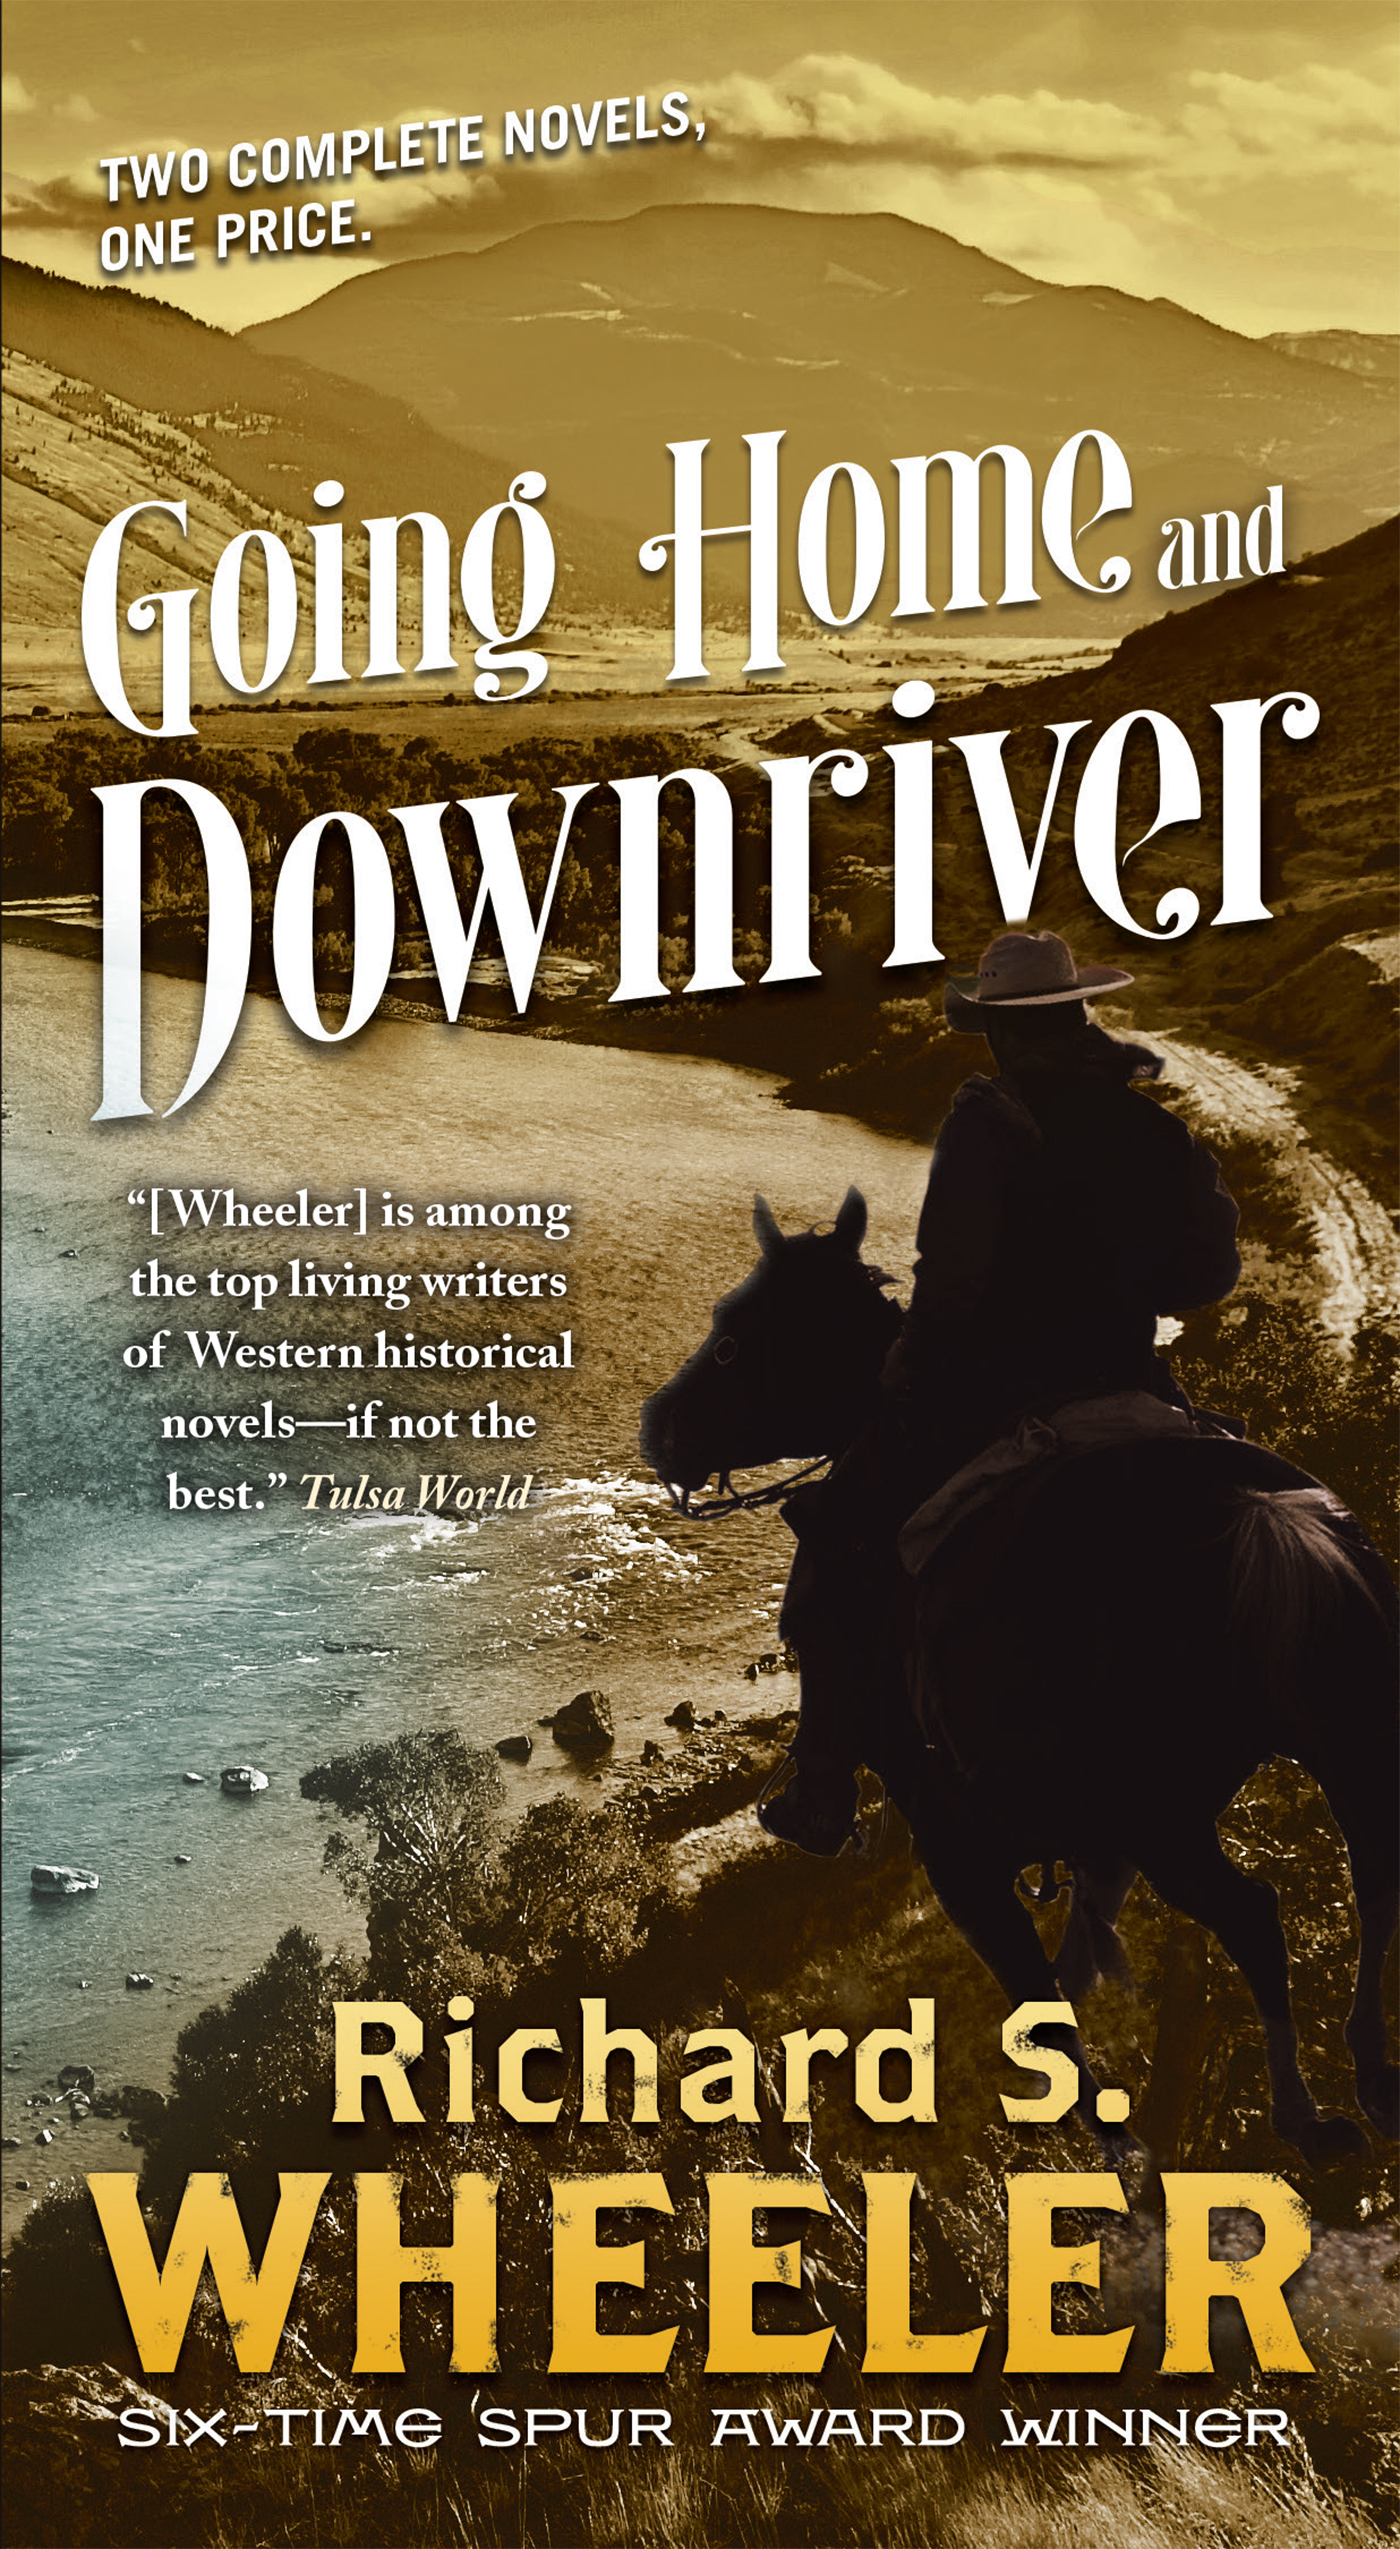 Going Home and Downriver by Richard S. Wheeler